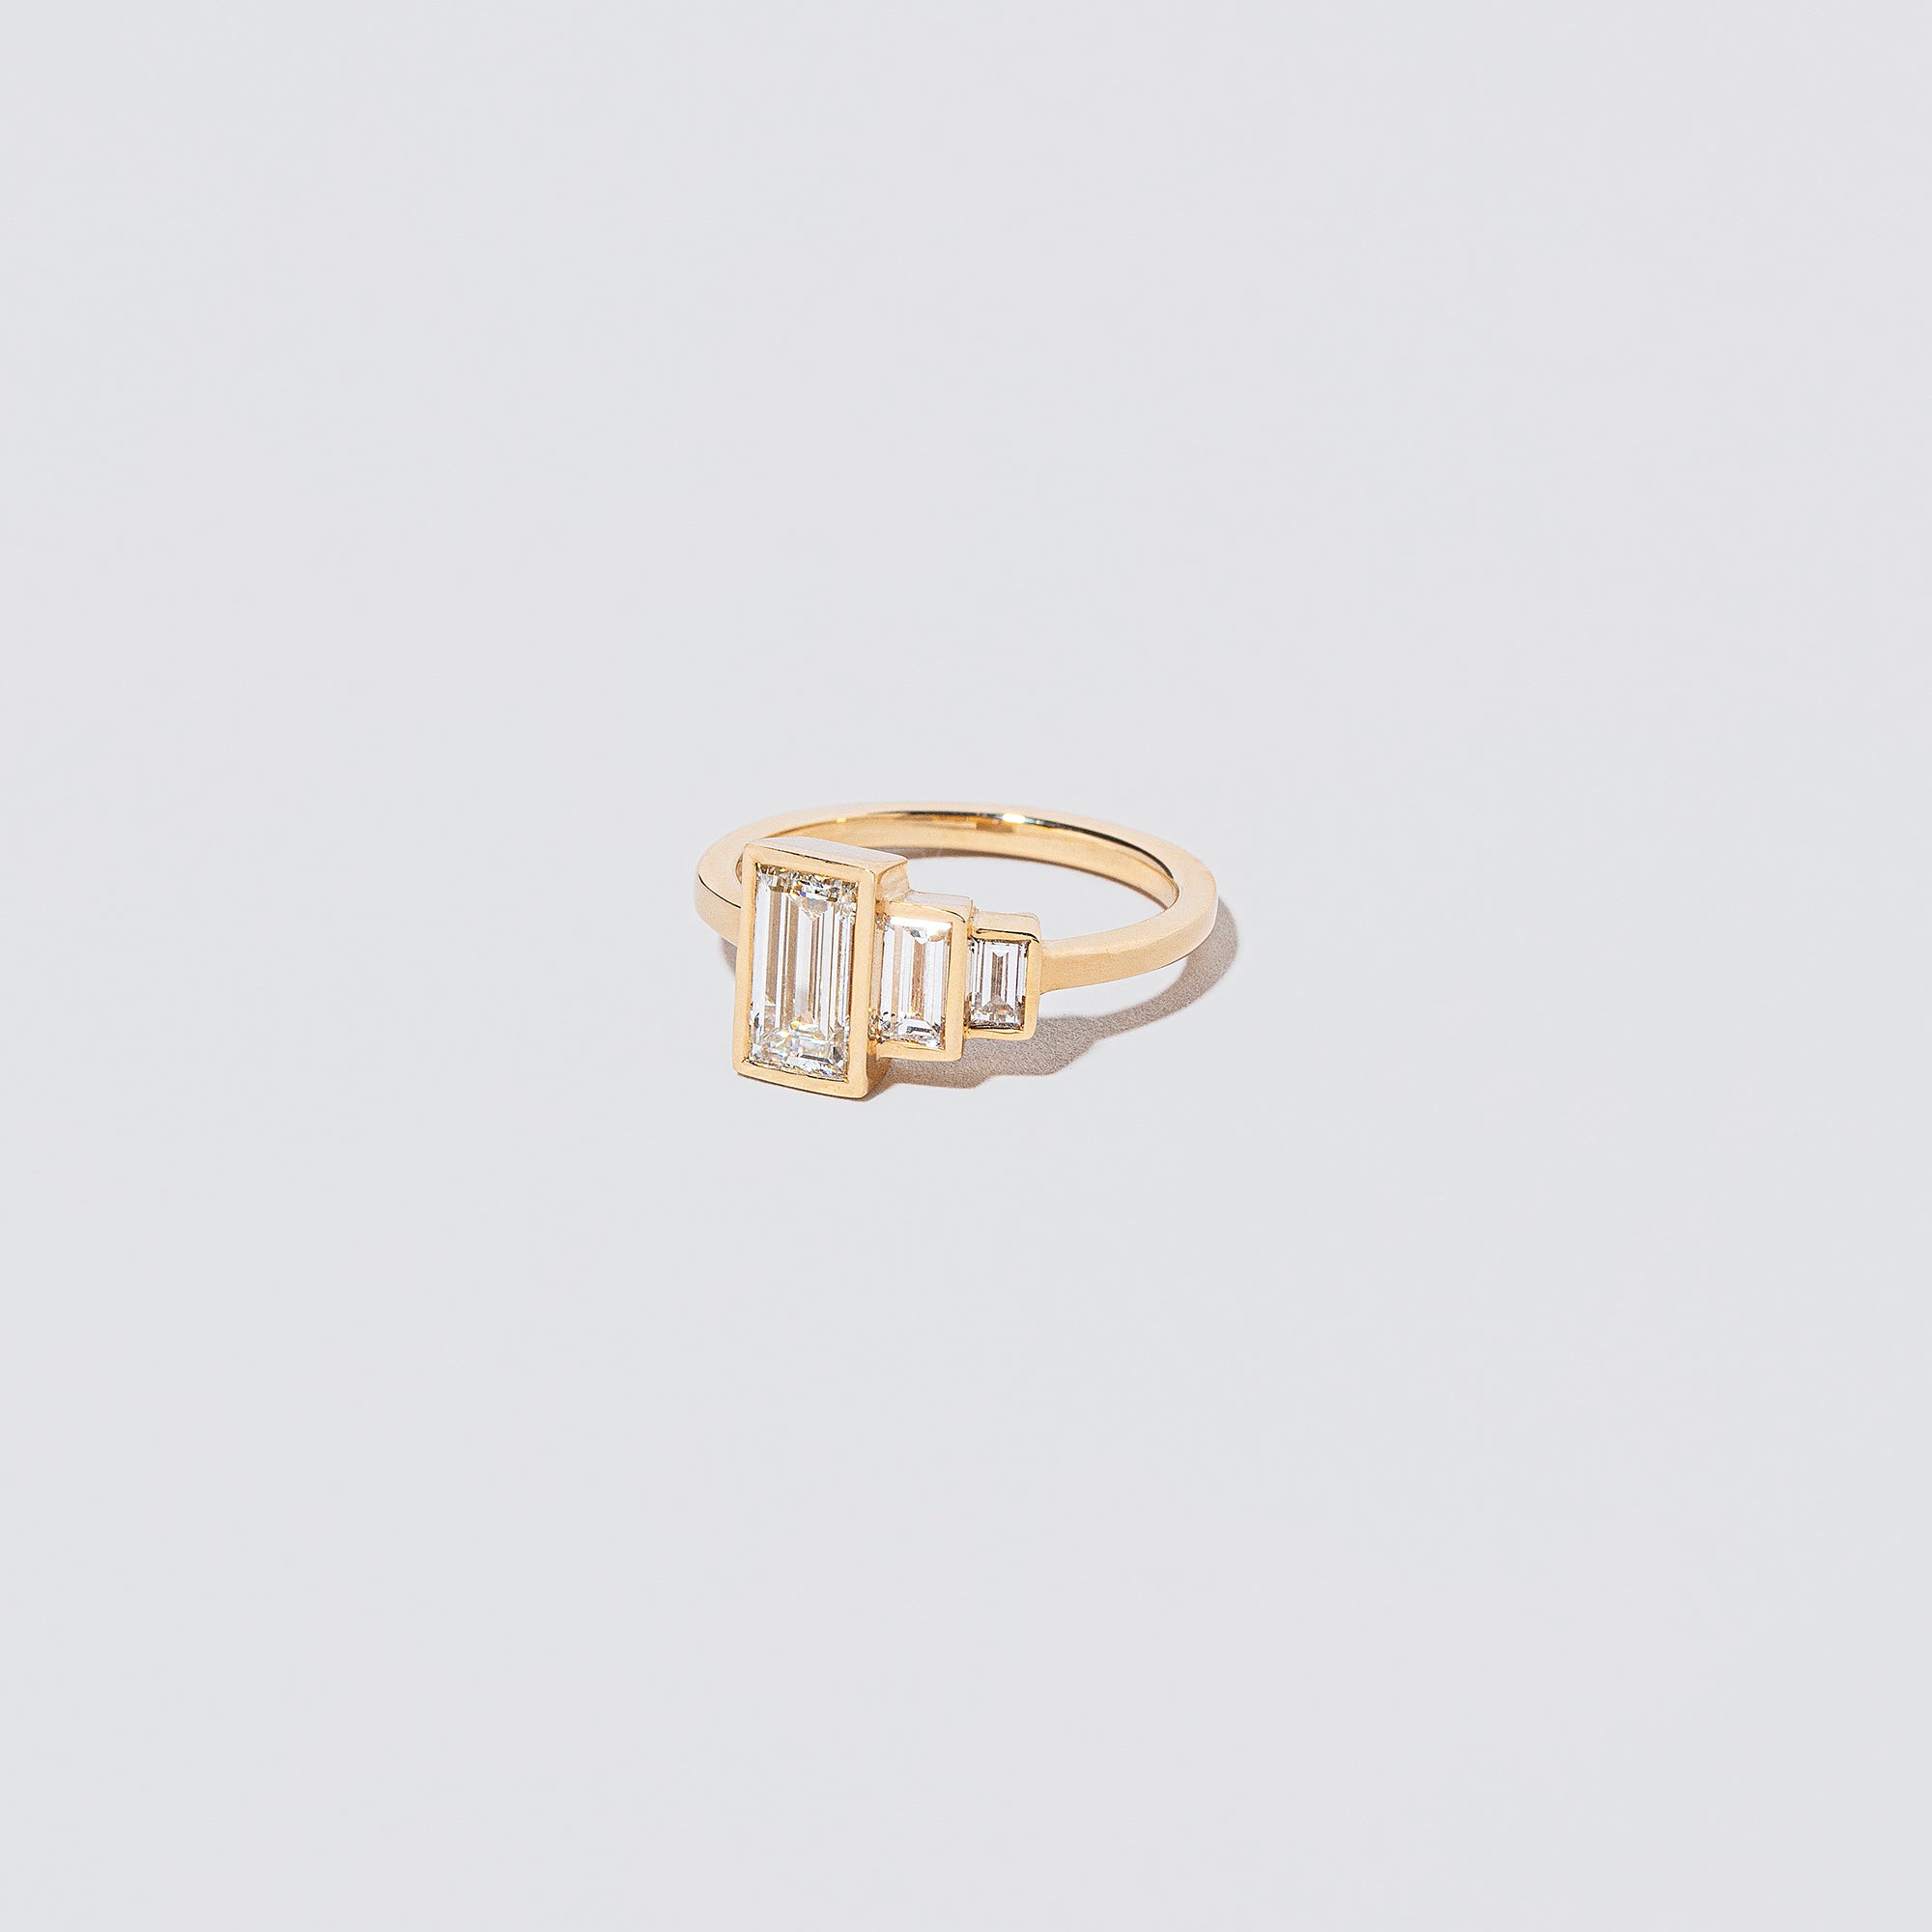 product_details:: Union Ring on light color background.